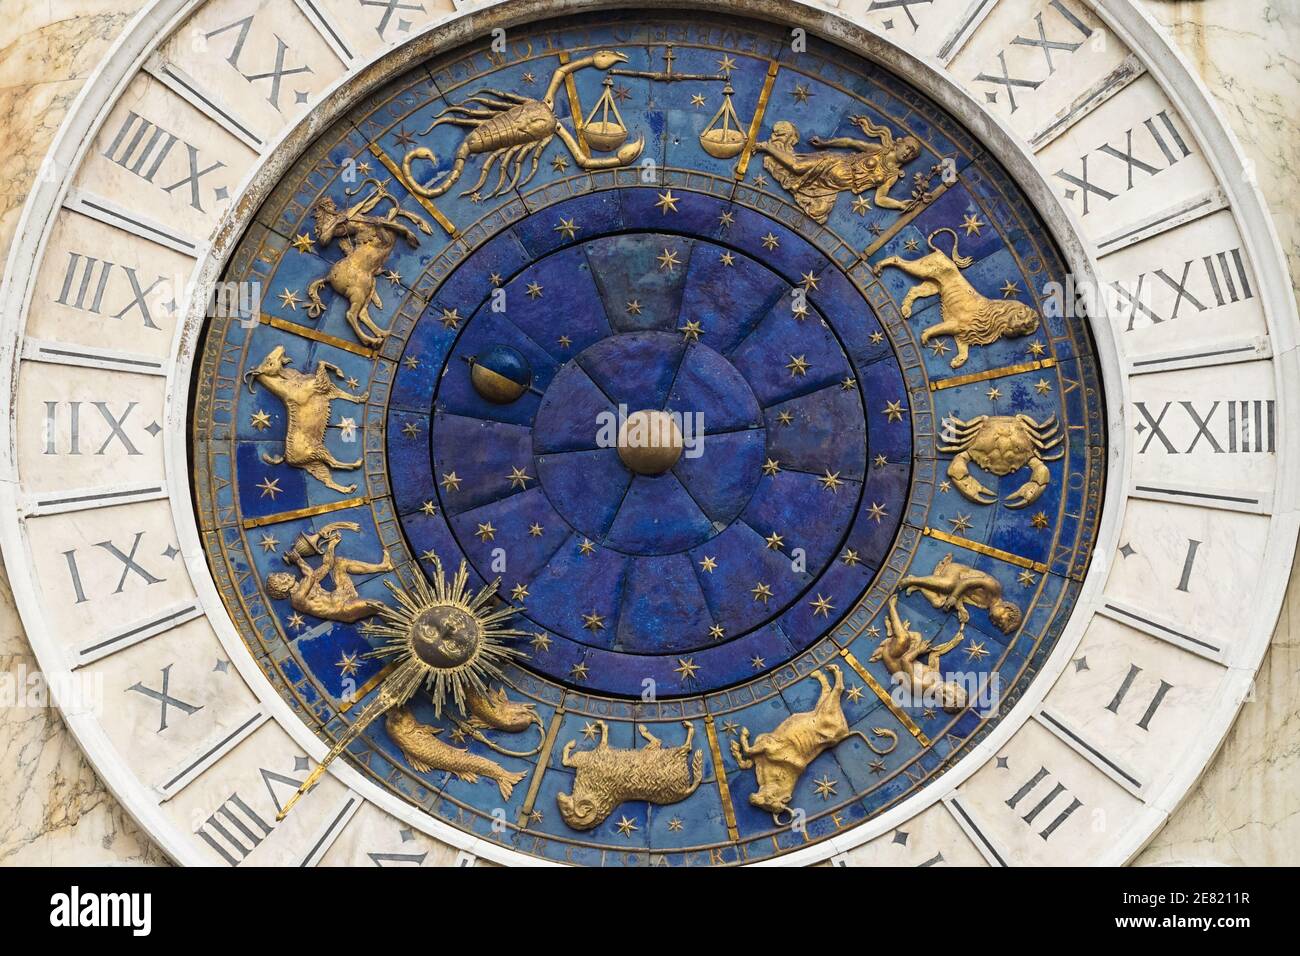 Astrological signs, zodiac symbols on St Mark's Clock Tower renaissance building on the the Piazza San Marco in Venice, Italy Stock Photo